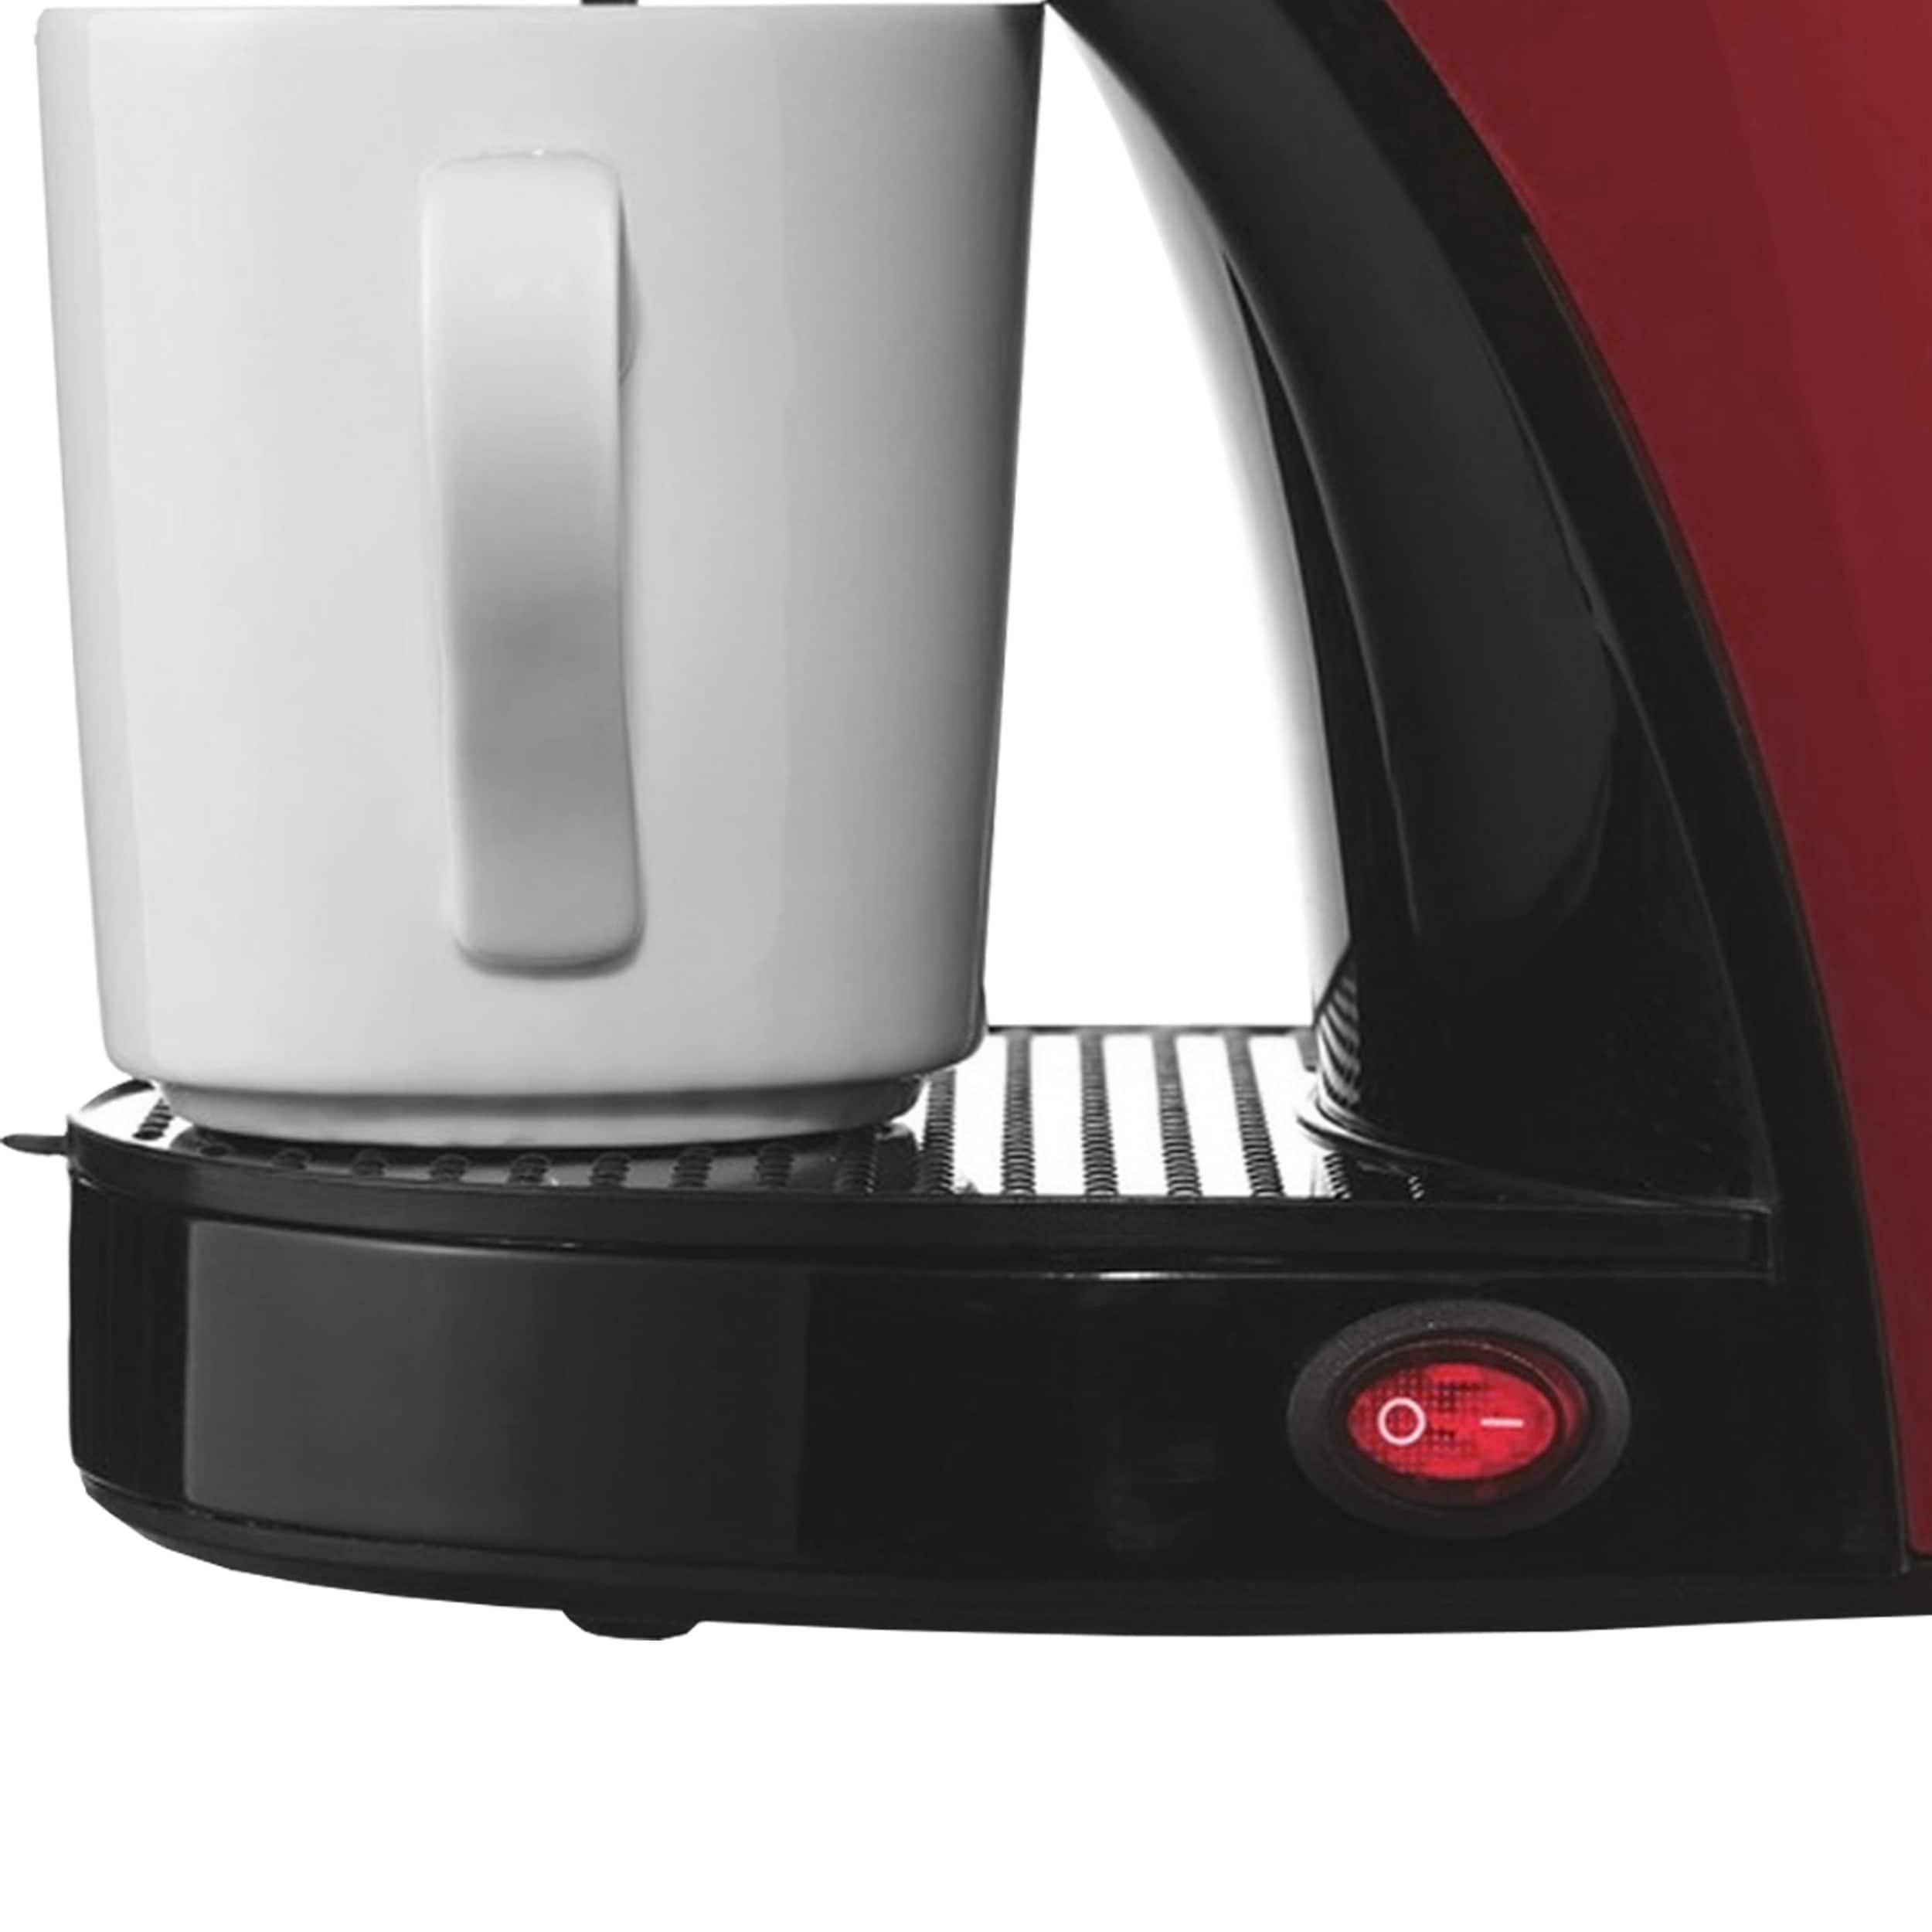 Frigidaire Stainless Steel Single Cup Coffeemaker with Mug ,Red